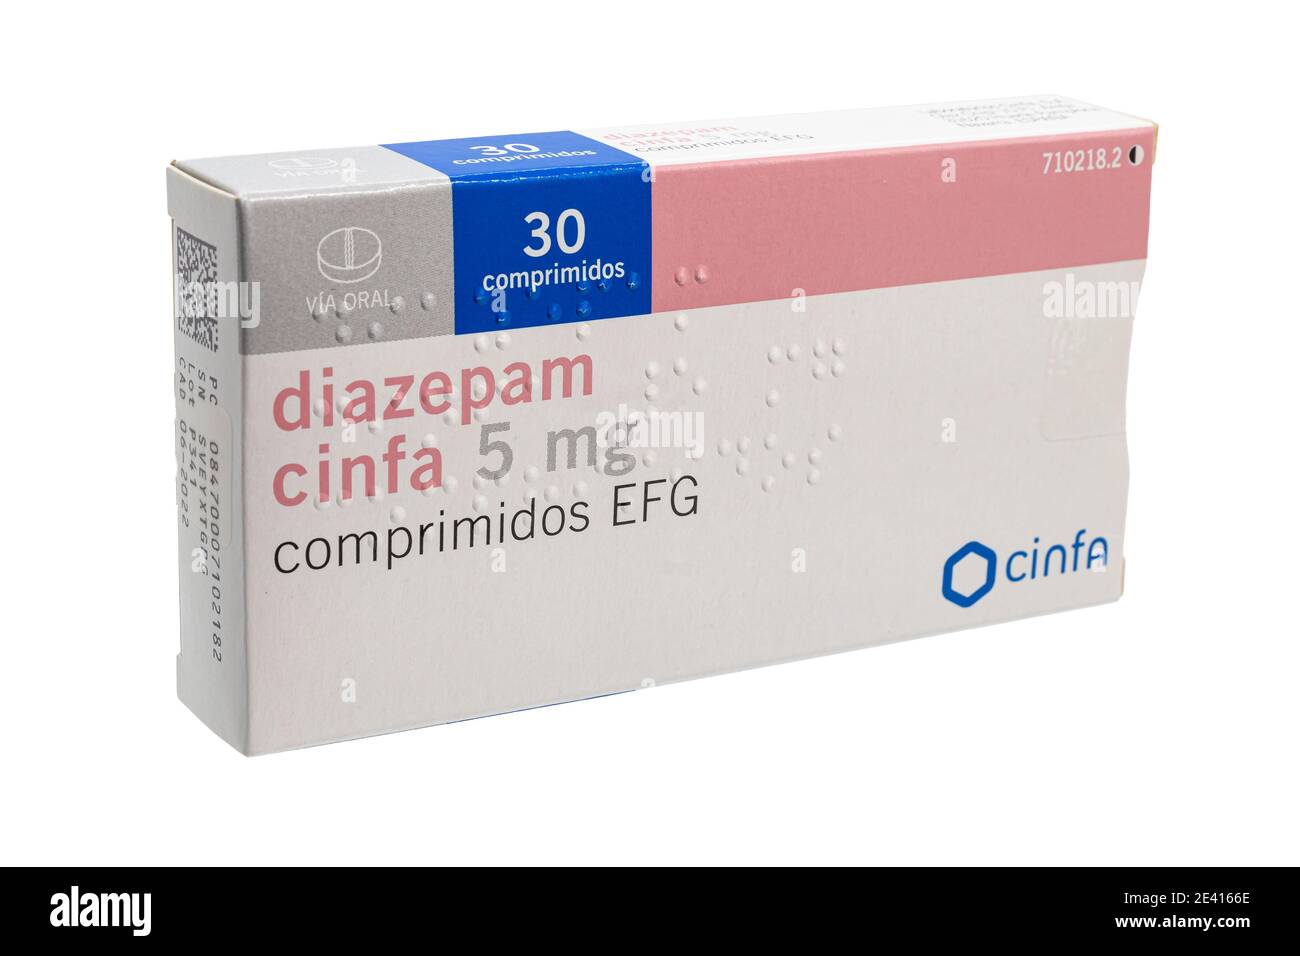 Huelva, Spain - January 21, 2021: Spanish Box of Diazepam brand CINFA. Diazepam, first marketed as Valium, is a medicine of the benzodiazepine family Stock Photo